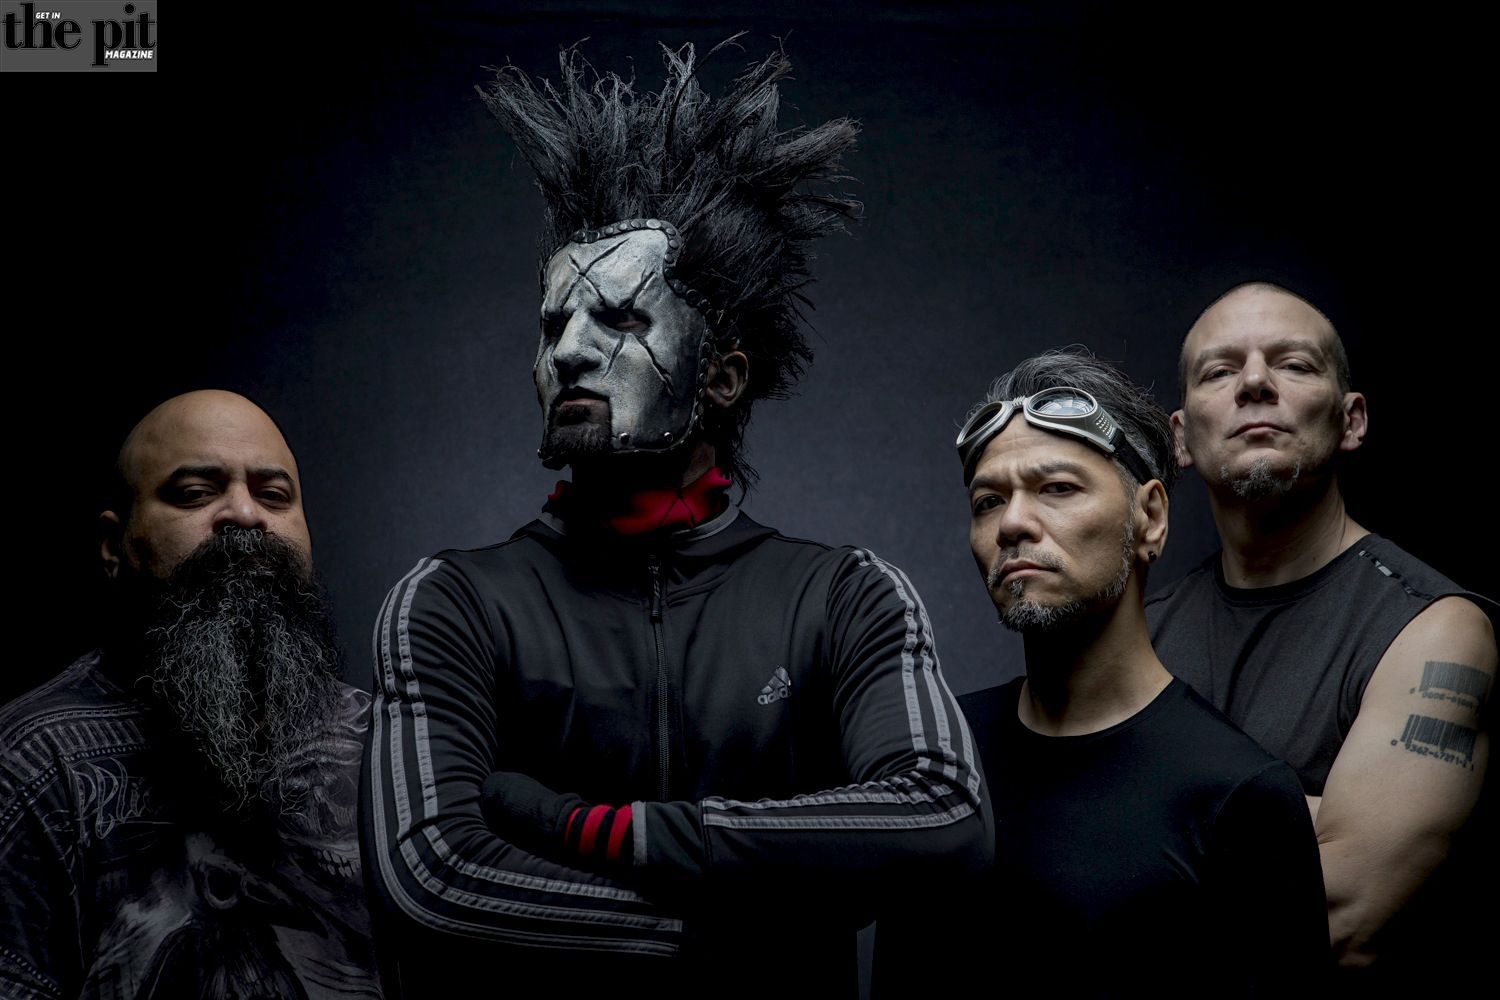 Four men from Static X posing for a photo, one with elaborate black and white face makeup and spiked hair, others with intense expressions, set against a dark background.